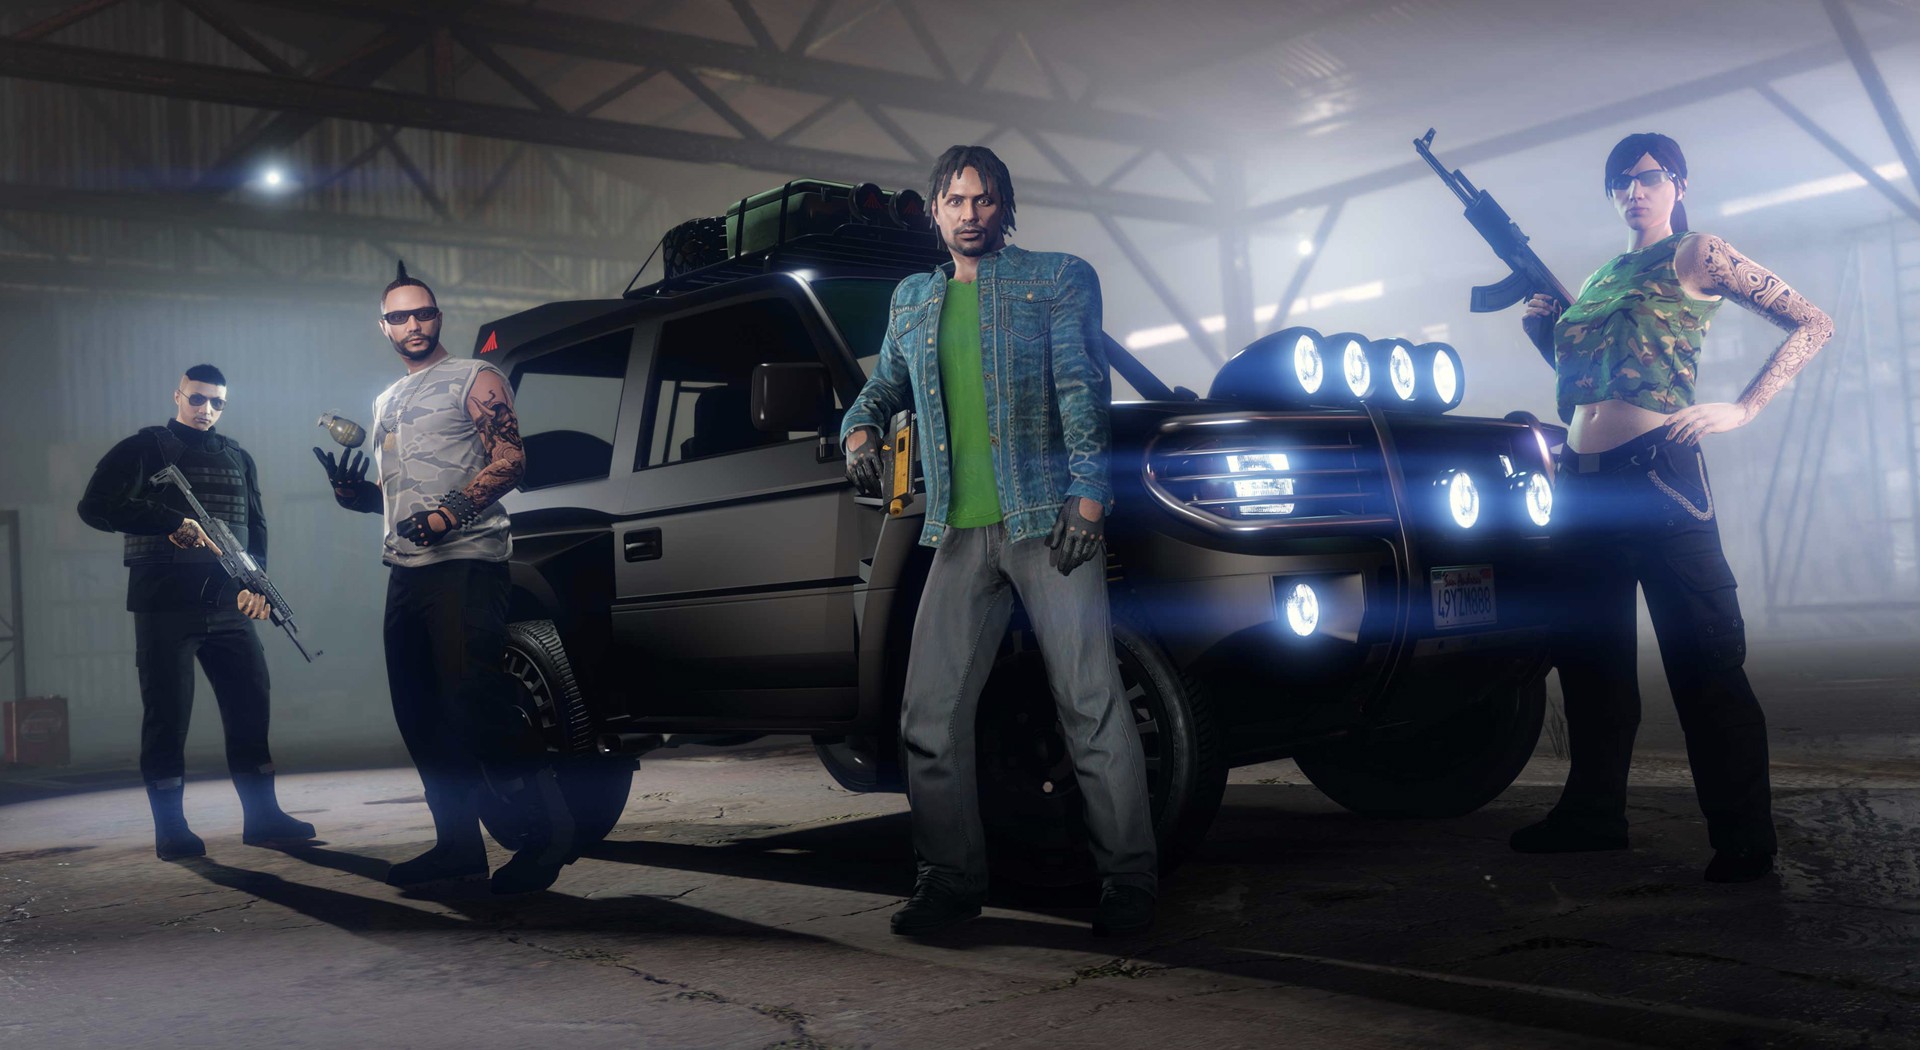 Grand Theft Auto V Premium Edition Now With 63% Discount on Steam